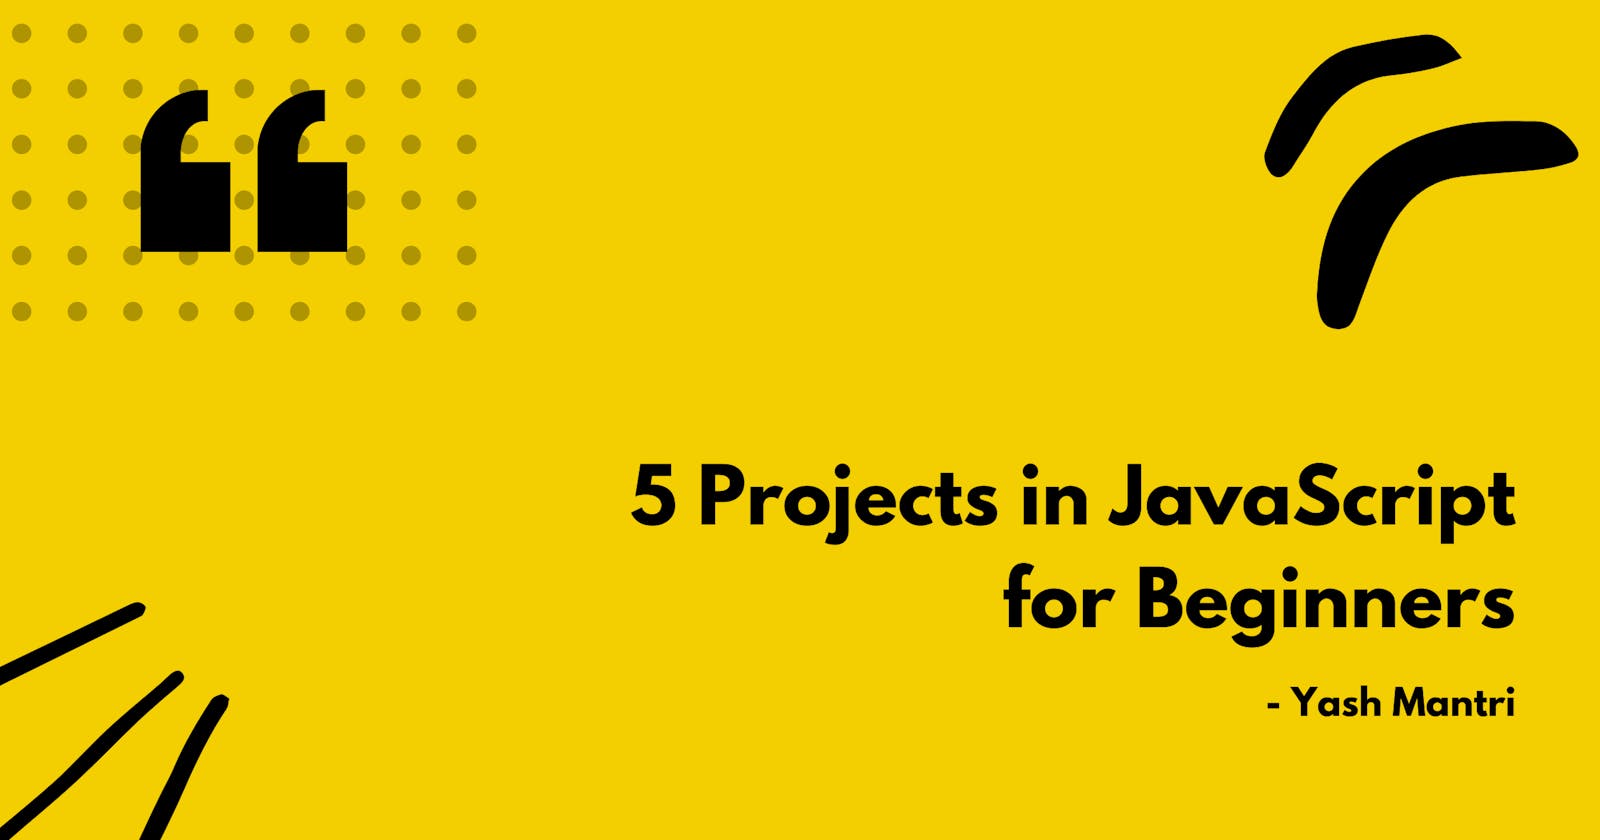 5 Projects in JavaScript for Beginners